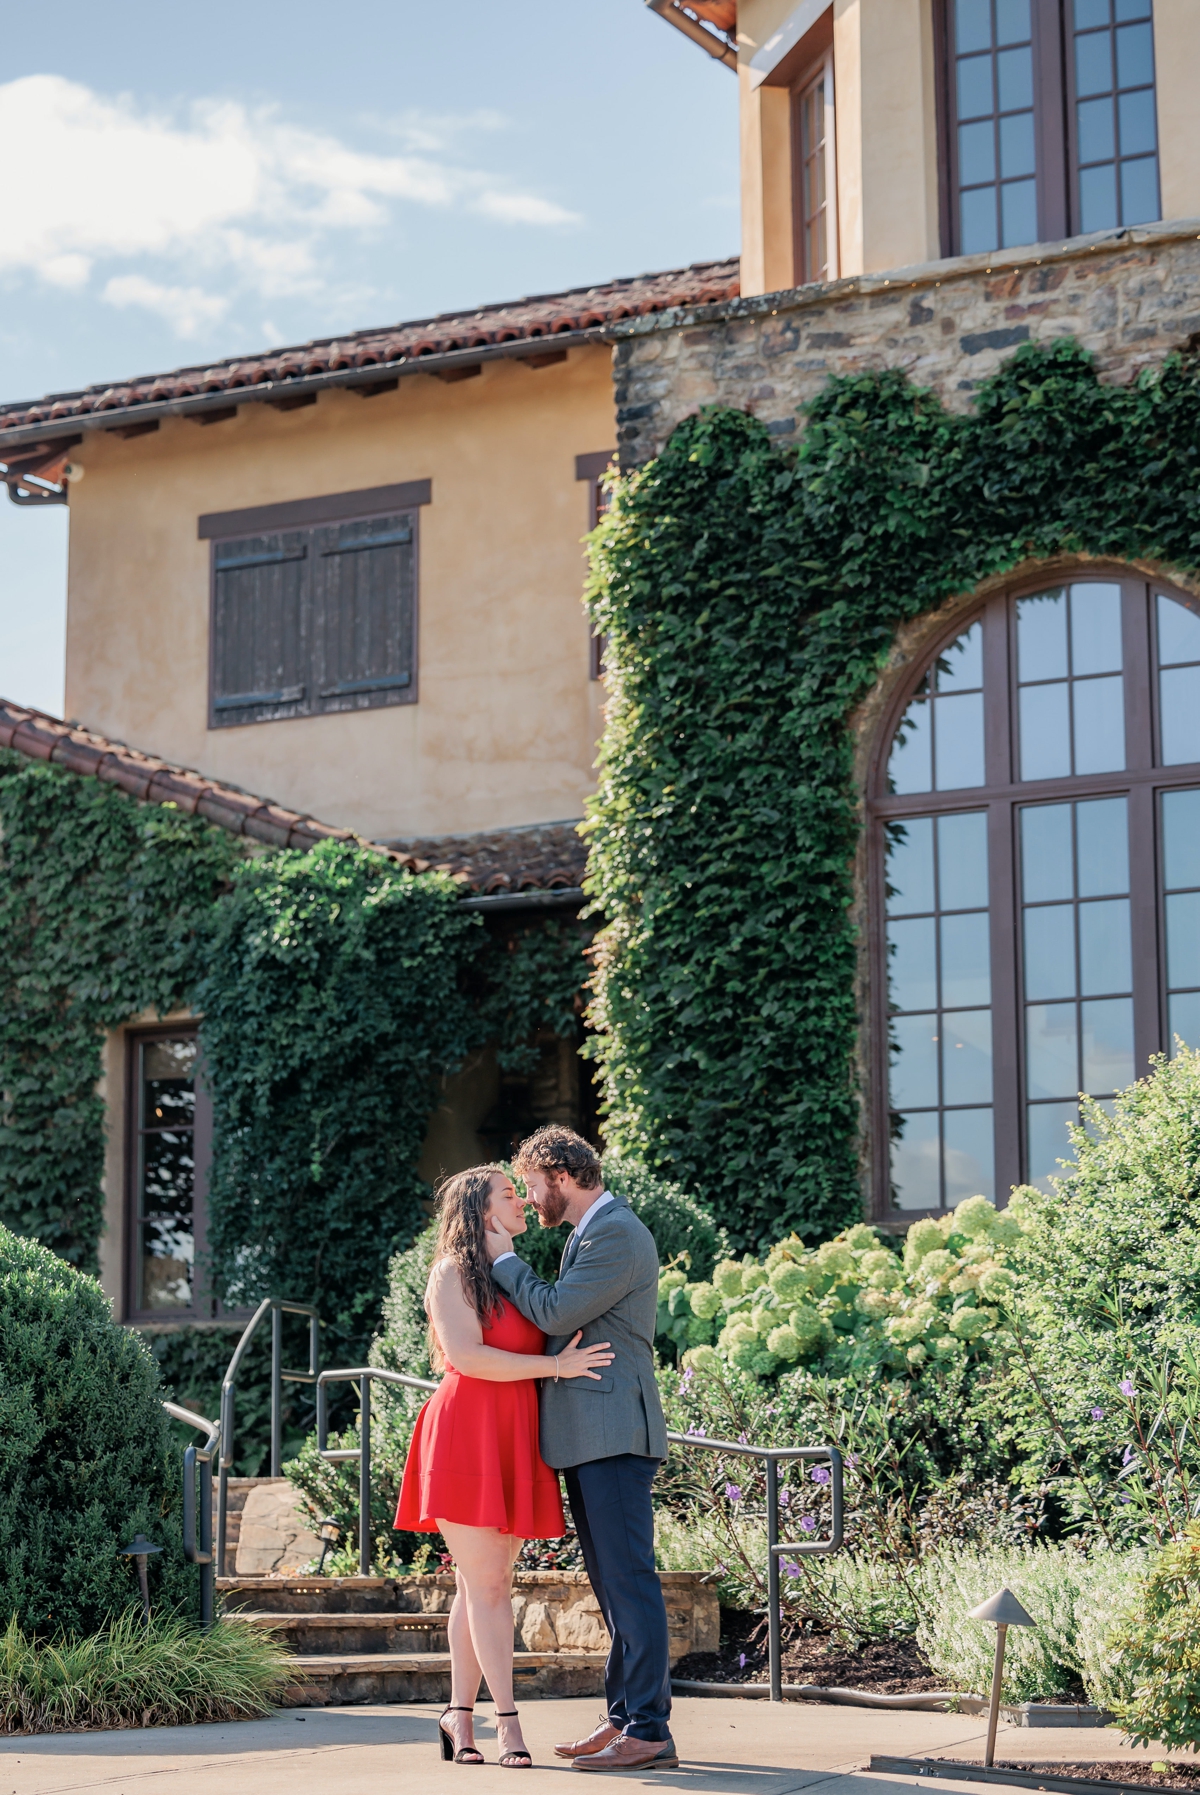 Rachel and Matthew kissing in front of the winery house during their Montaluce Winery engagement session.